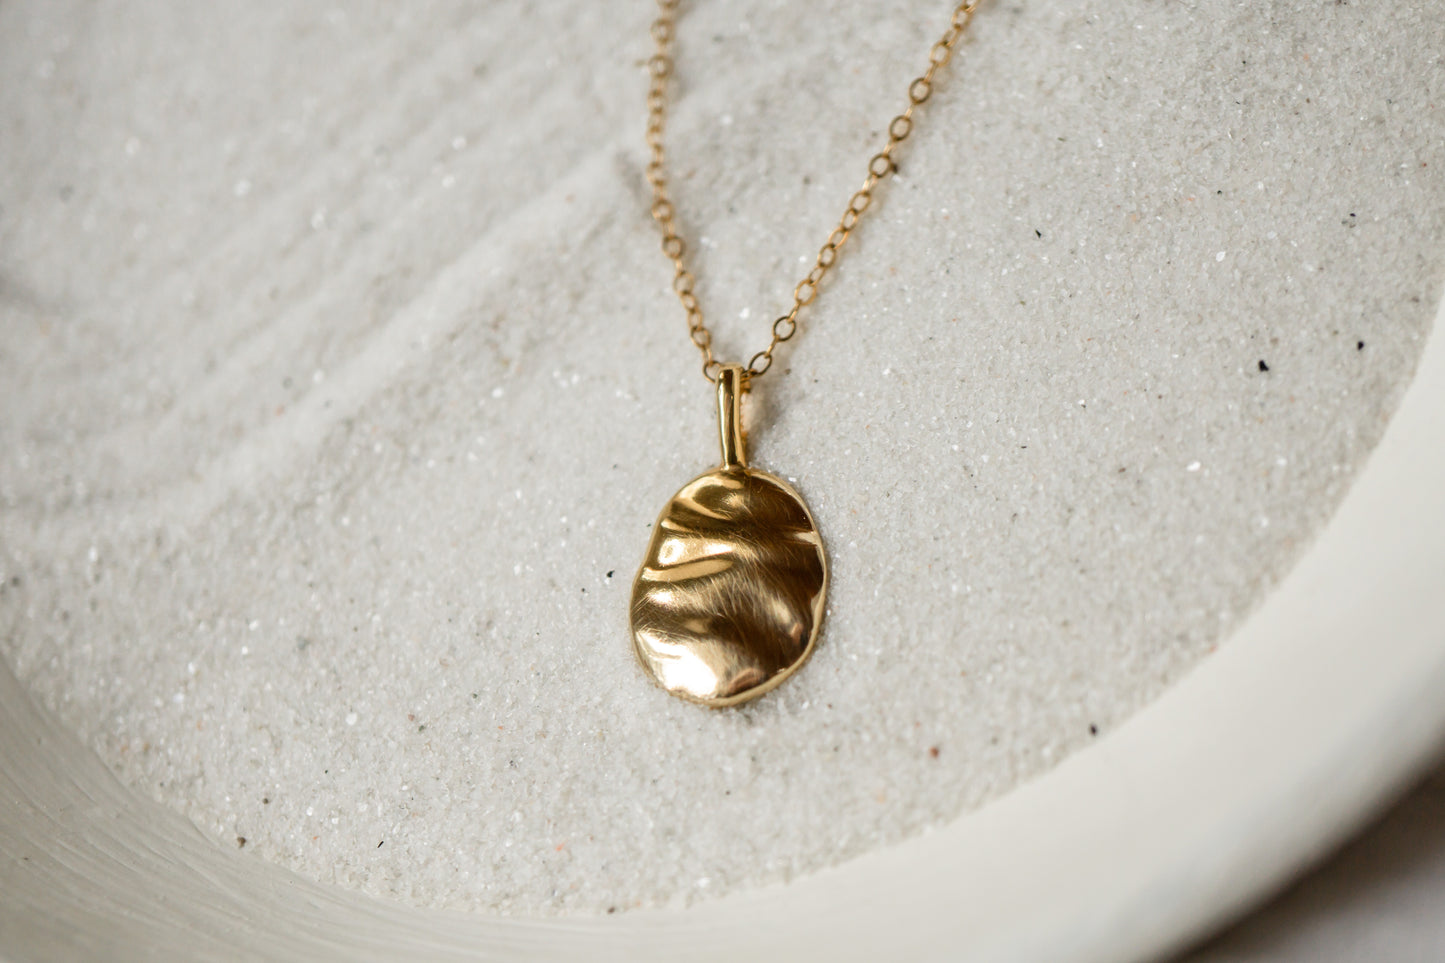 Ripple necklace - gold plated